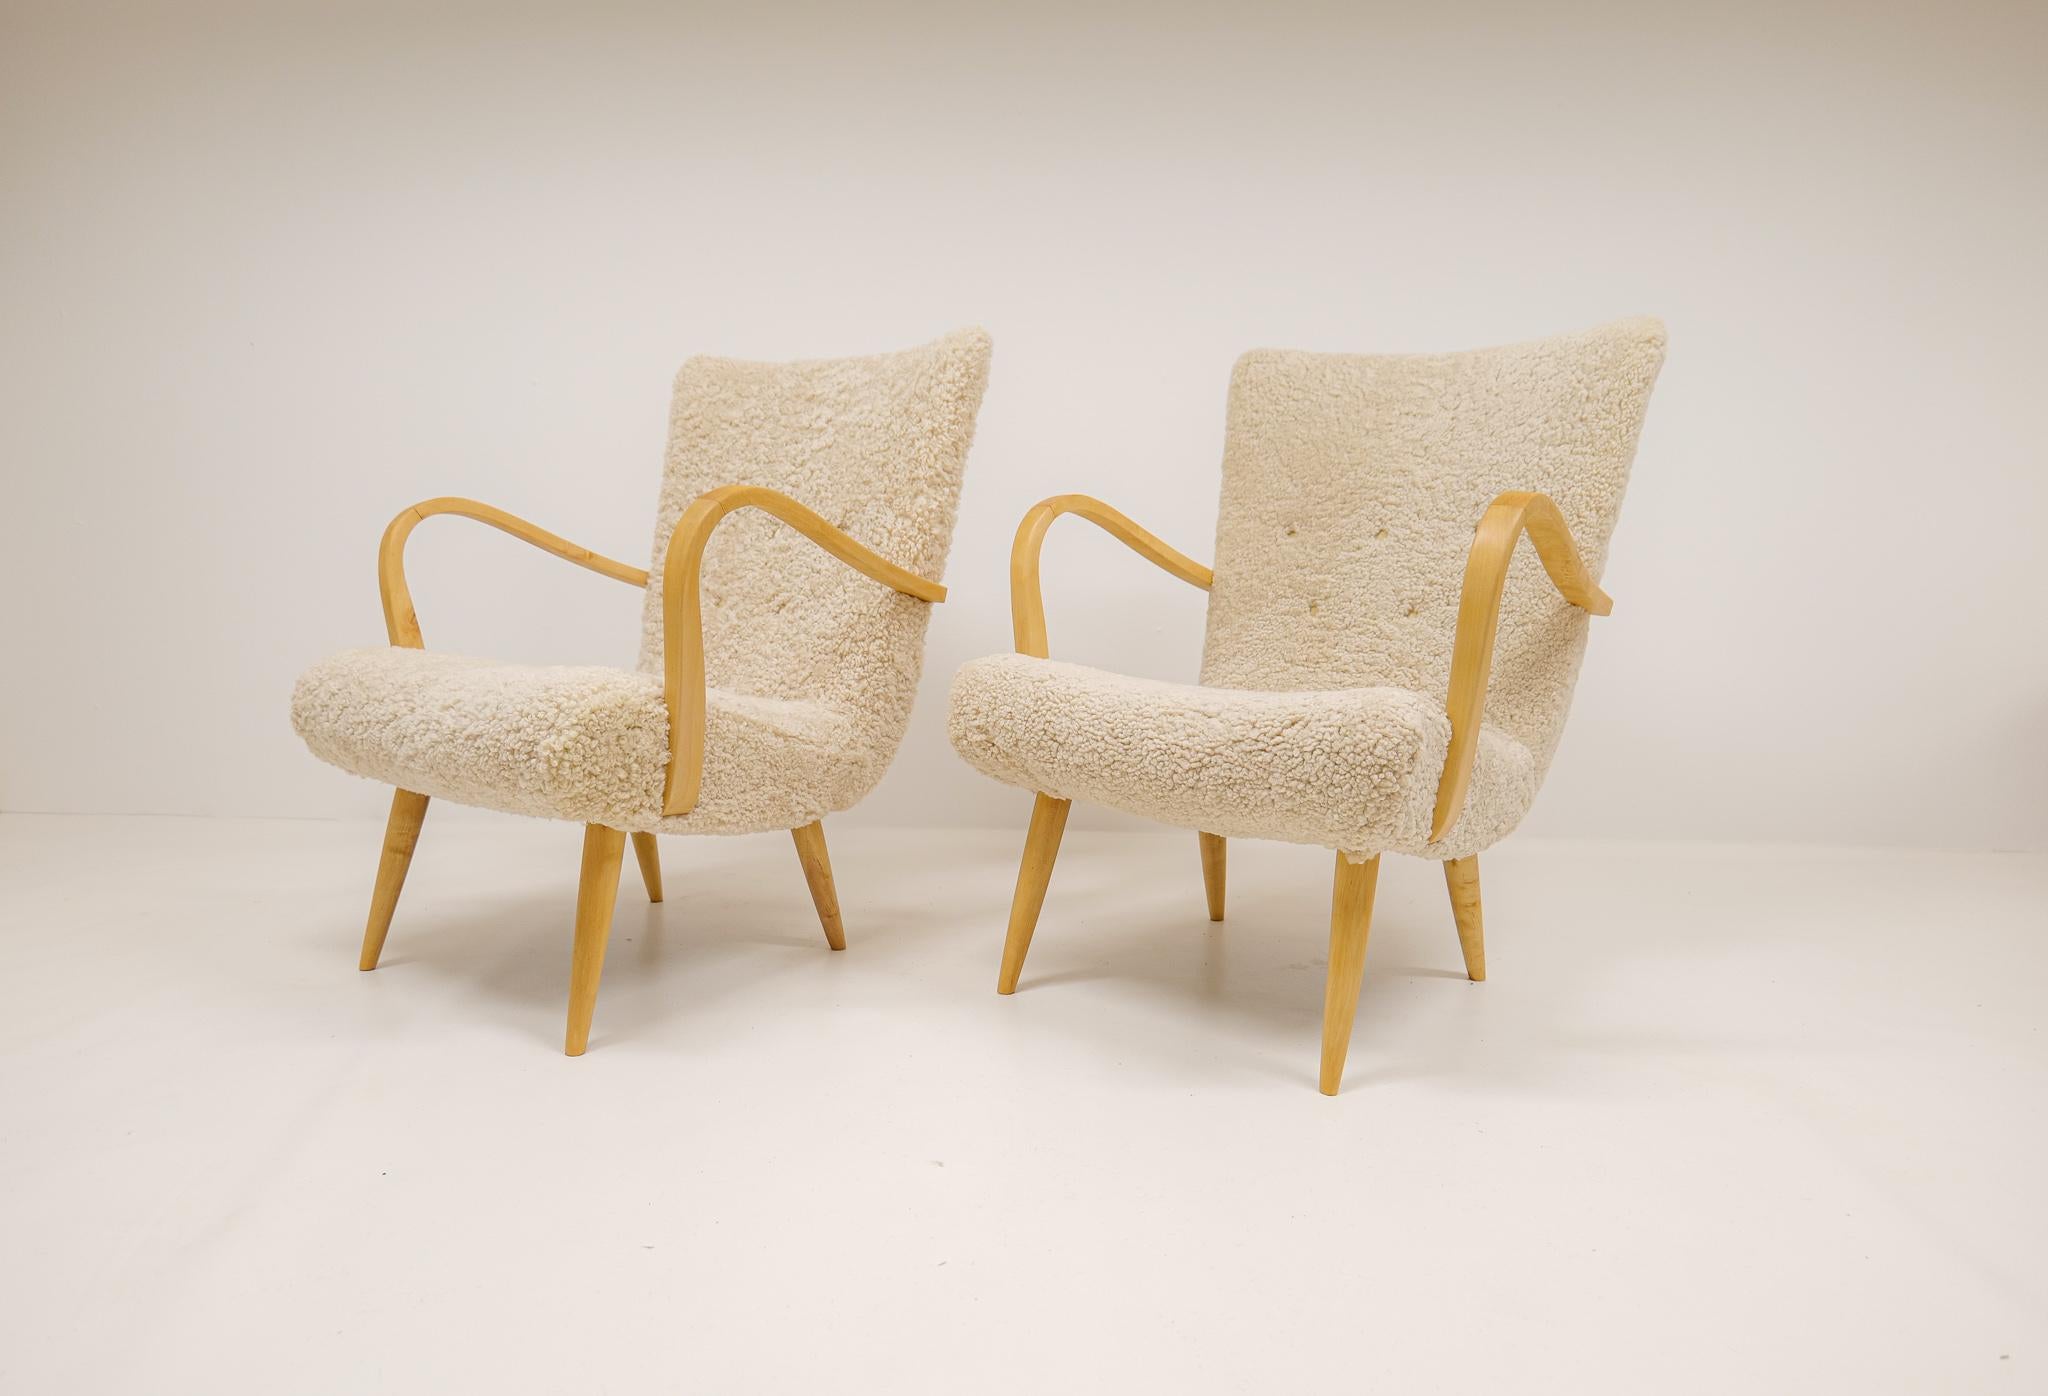 These lovely sculptured easy/lounge chairs were made in the 1940-50 s Sweden and are attributed to designer G.A. Berg.
The arms and legs are made in birch that has been refinished and gives a good look to the shape of the chairs that are newly